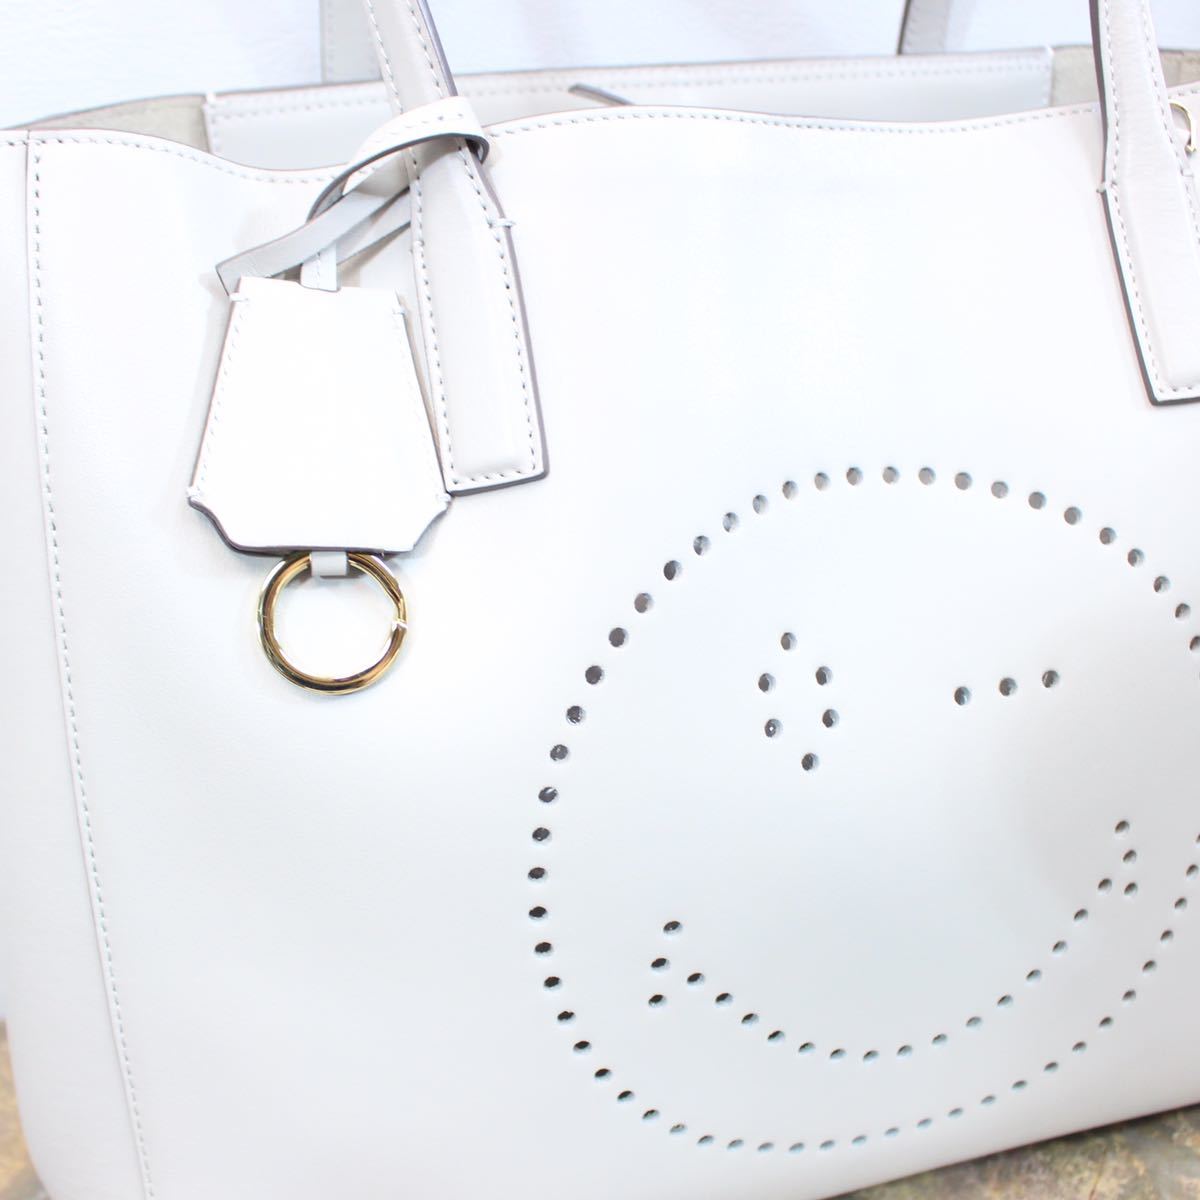 ANYA HINDMARCH EBURY SHOPPER WINK SMILY LEATHER TOTE BAG MADE IN  ITALY/アニヤハインドマーチイーブリーレザートートバッグ